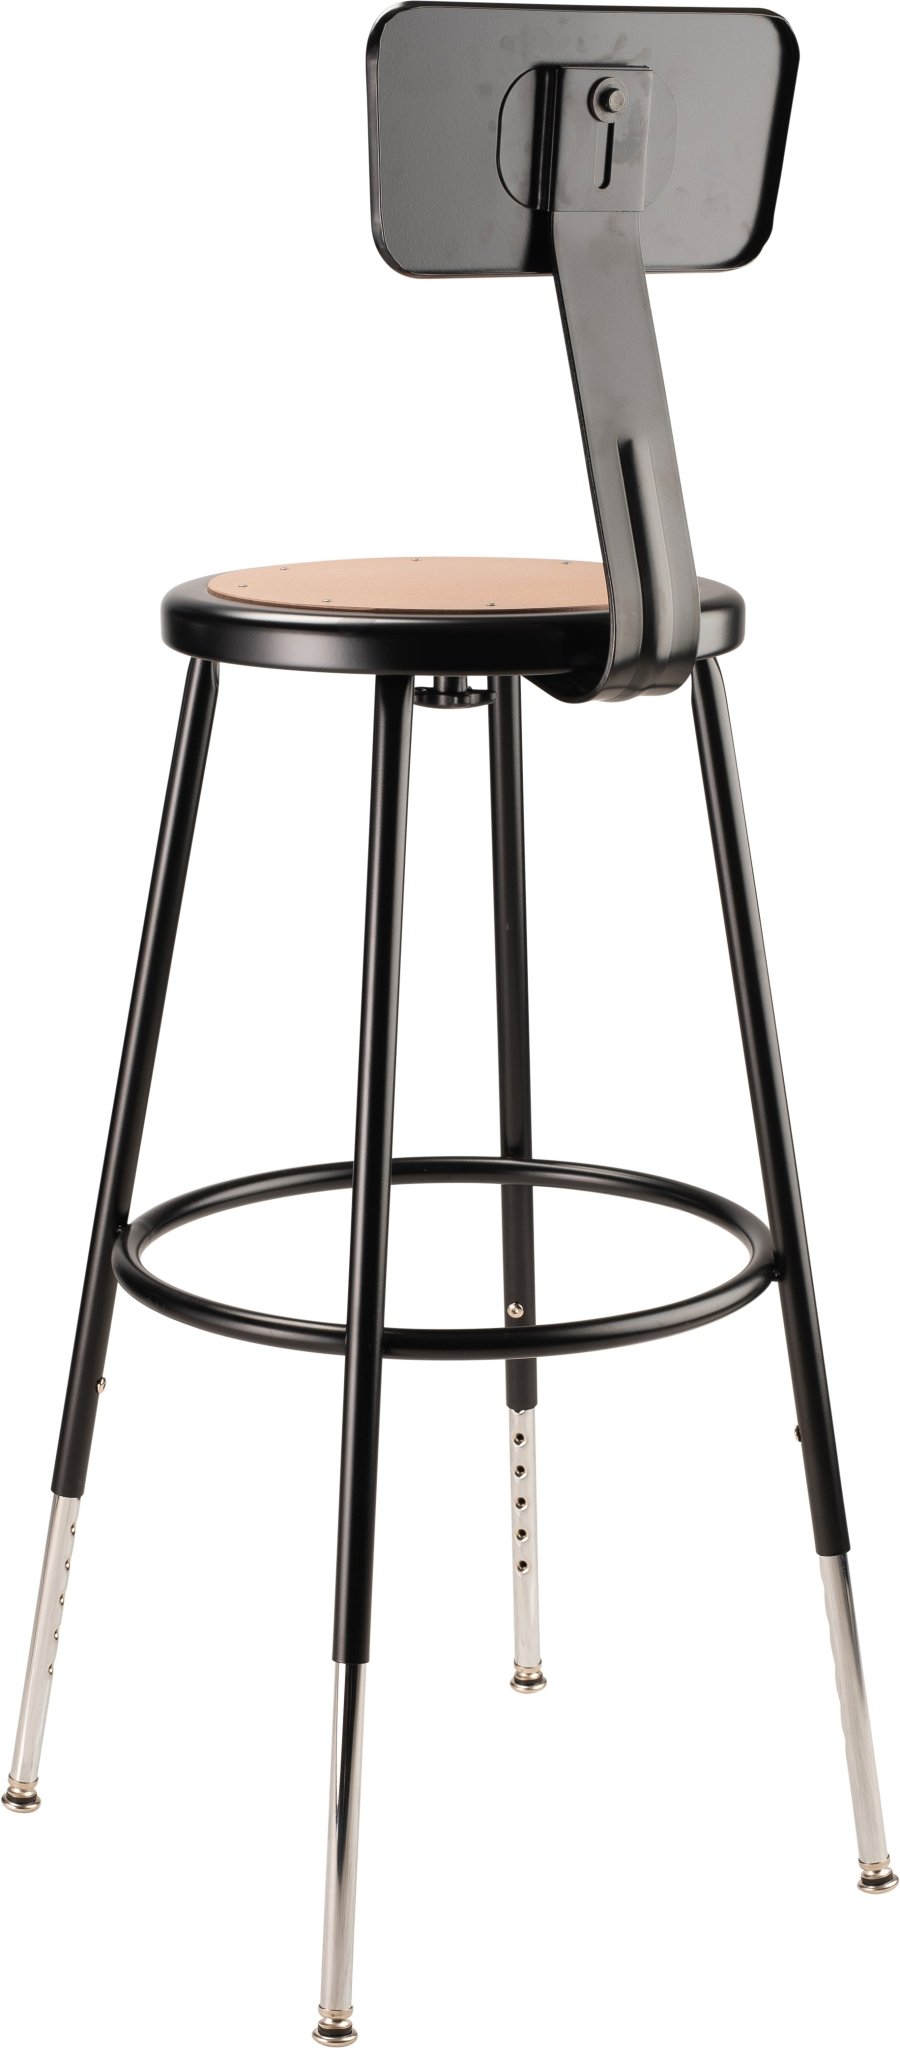 NPS 24.5" - 32.5" Height Adjustable Heavy Duty Steel Stool with Backrest (National Public Seating NPS-6224HB) - SchoolOutlet